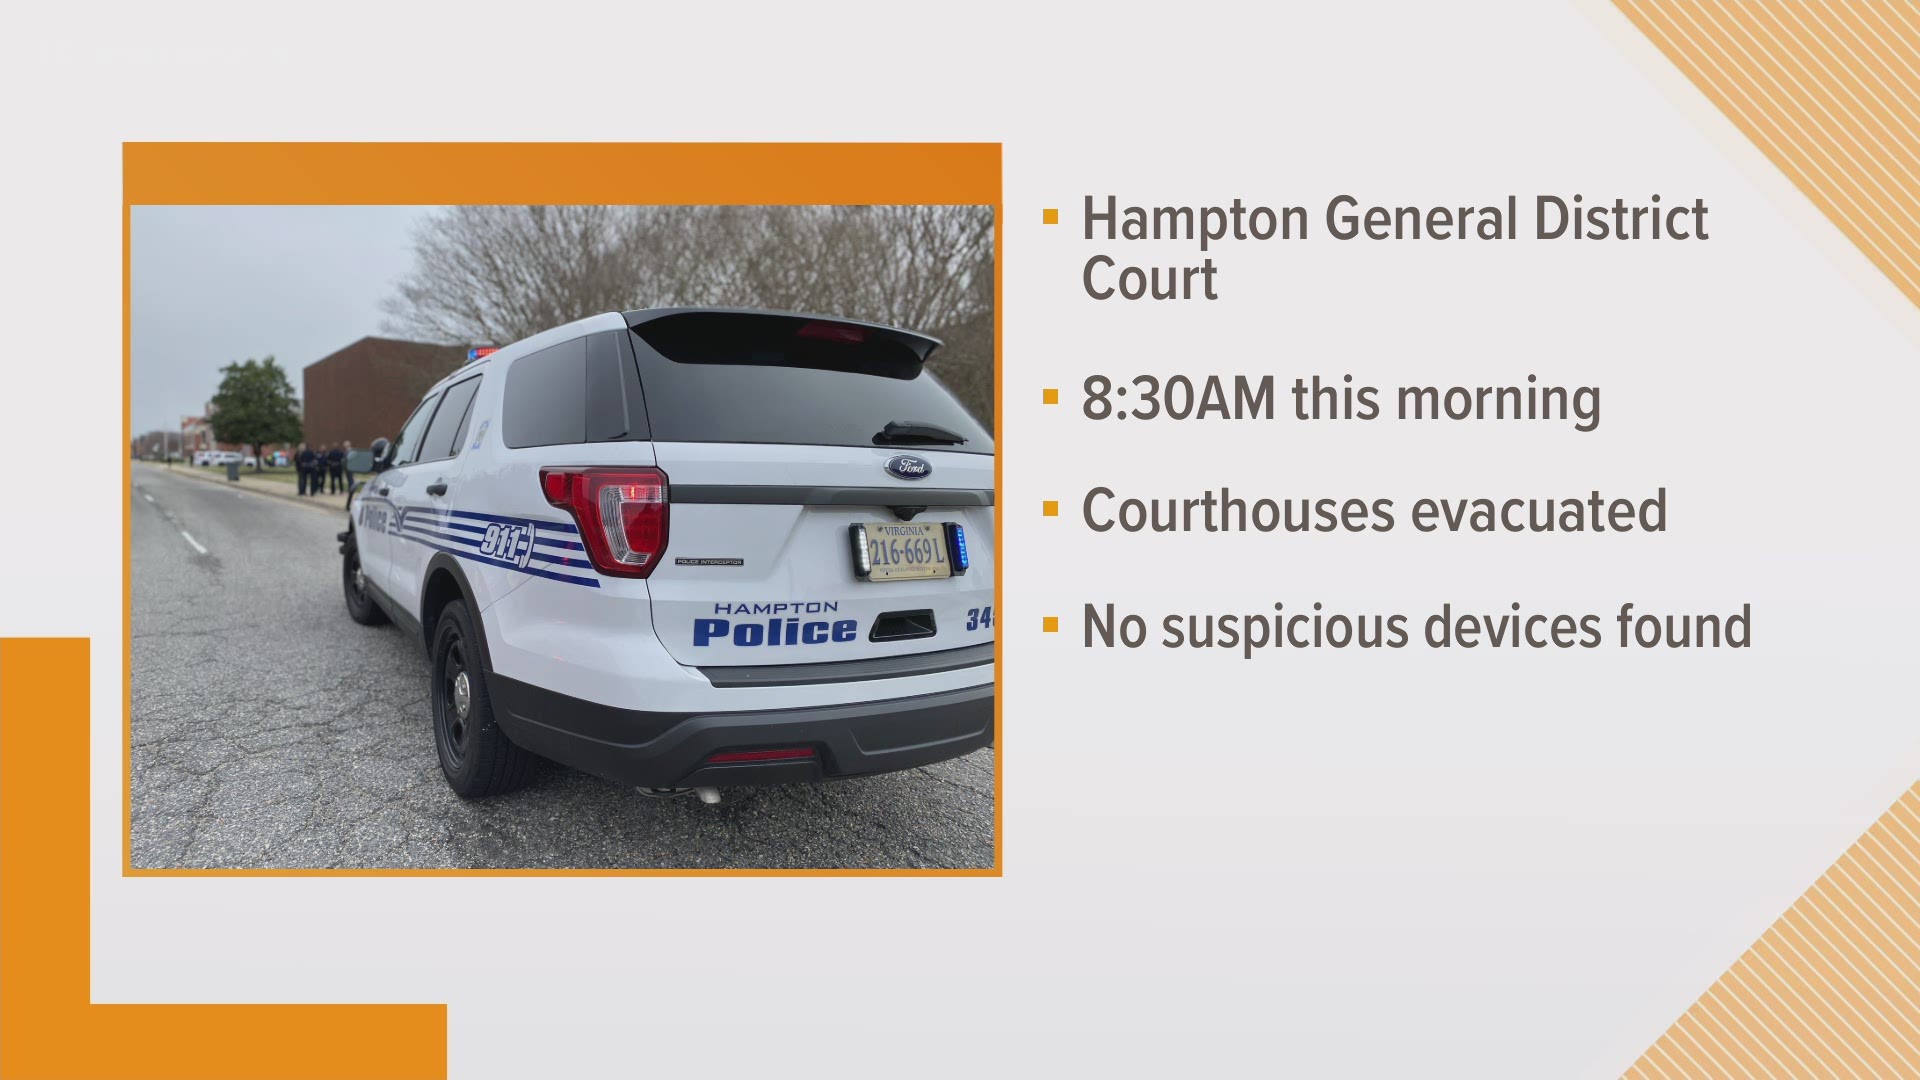 Hampton police said the courthouses have reopened after a bomb threat happened Tuesday morning. They said there were no suspicious devices found.